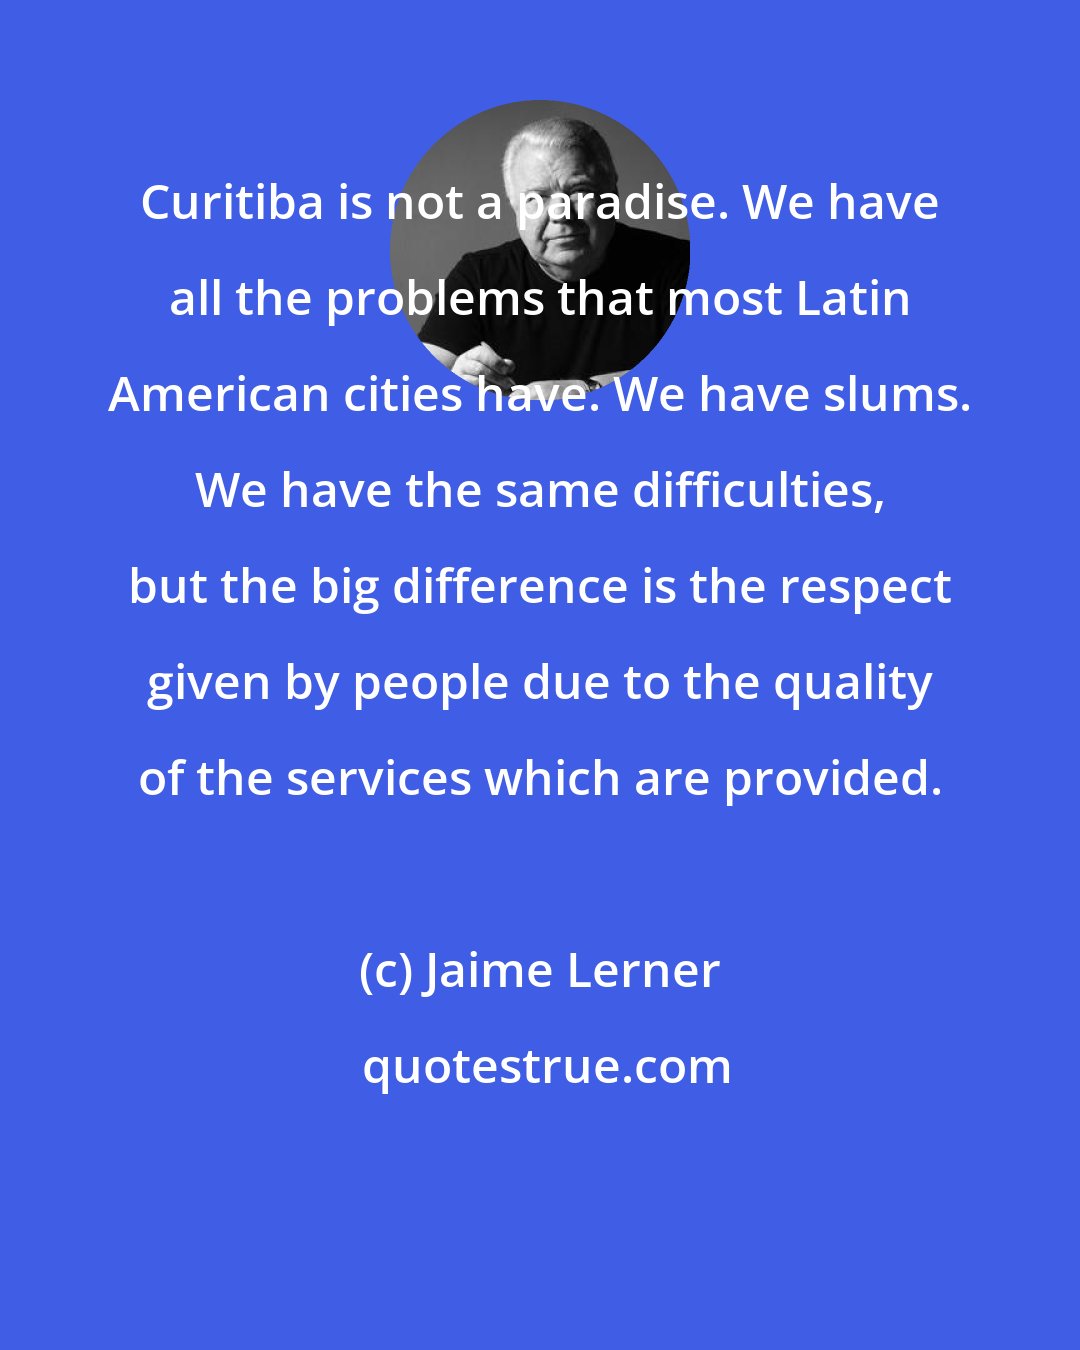 Jaime Lerner: Curitiba is not a paradise. We have all the problems that most Latin American cities have. We have slums. We have the same difficulties, but the big difference is the respect given by people due to the quality of the services which are provided.